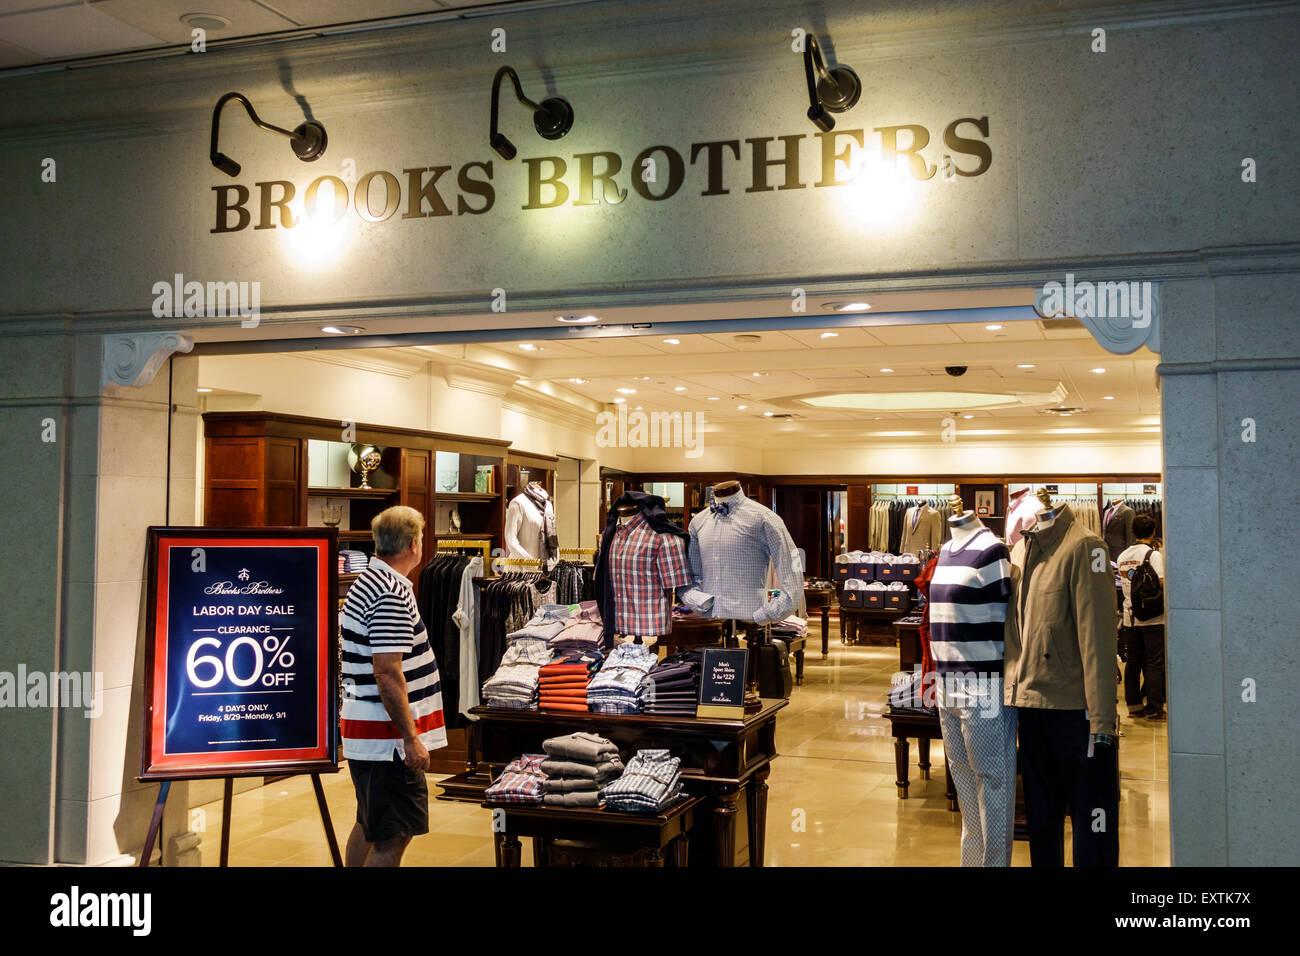 brooks brothers airport